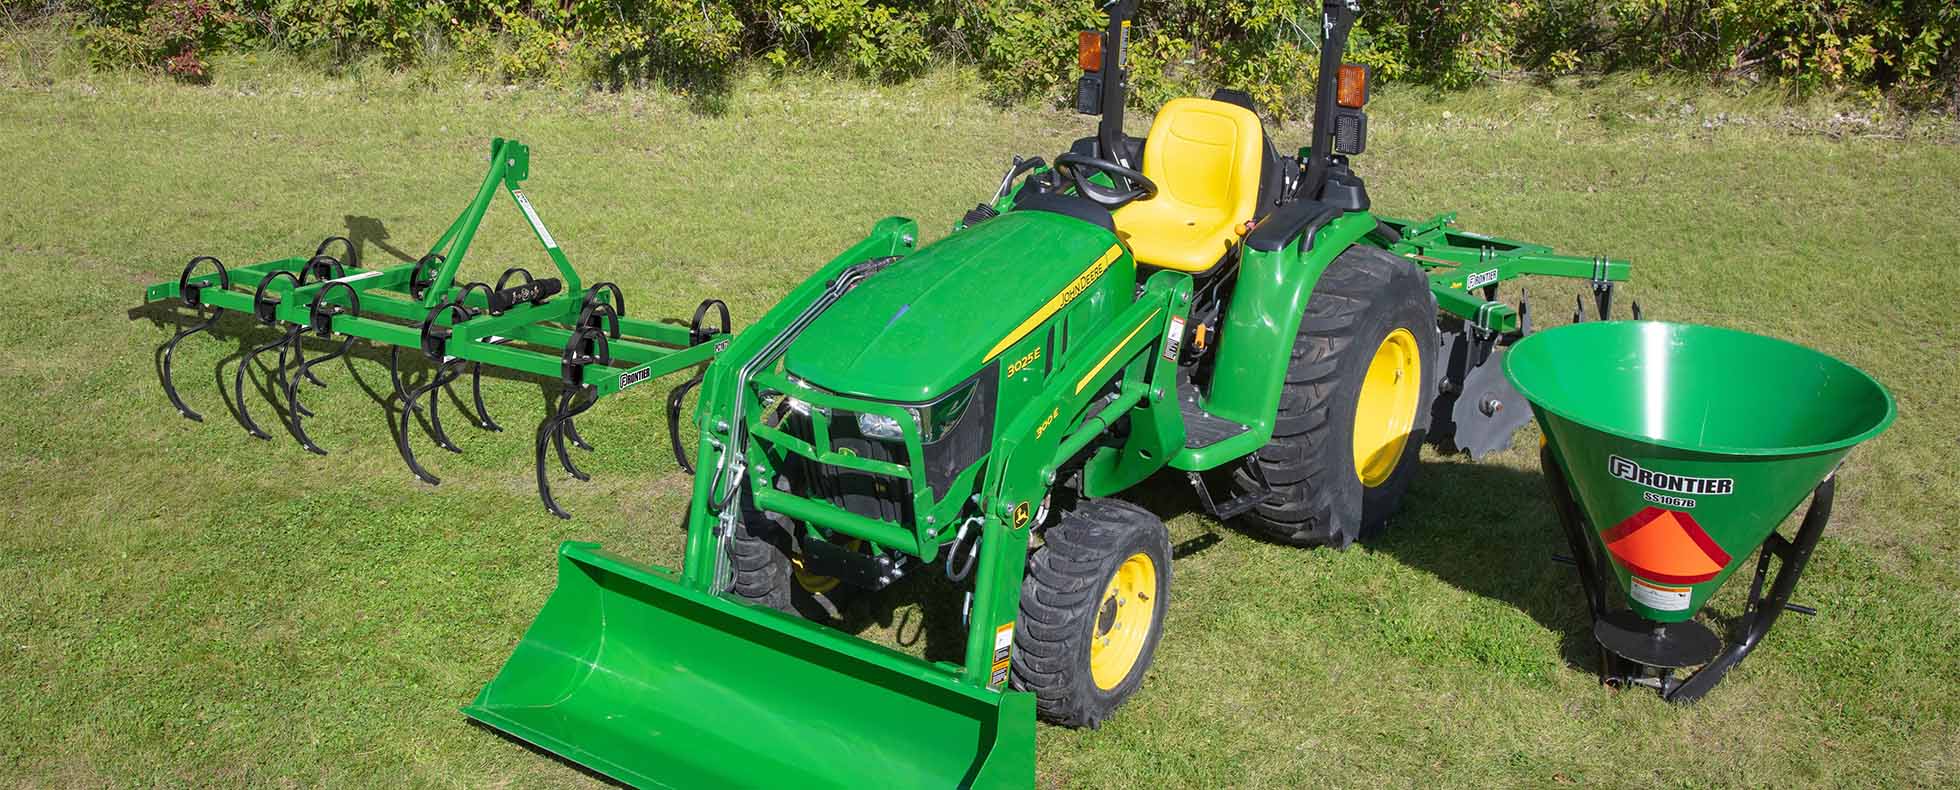 Top Utility Tractor Attachments for Creating a Food Plot